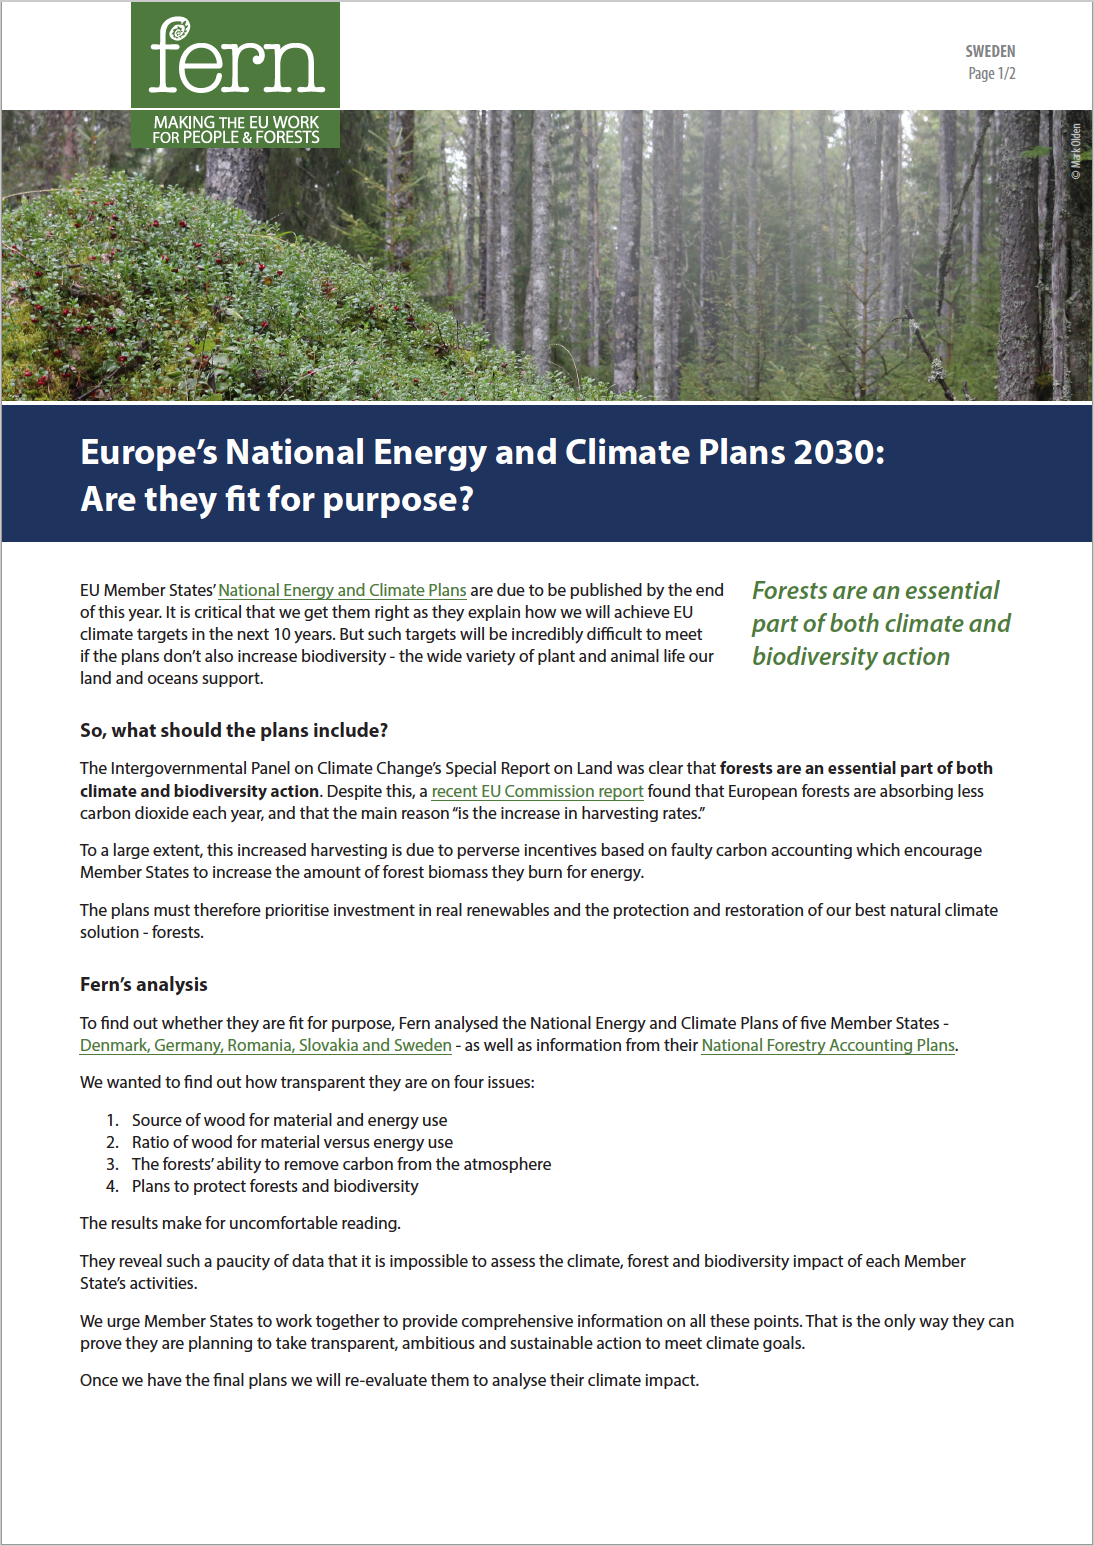 Europe’s National Energy and Climate Plans to 2030: Are they fit for purpose?